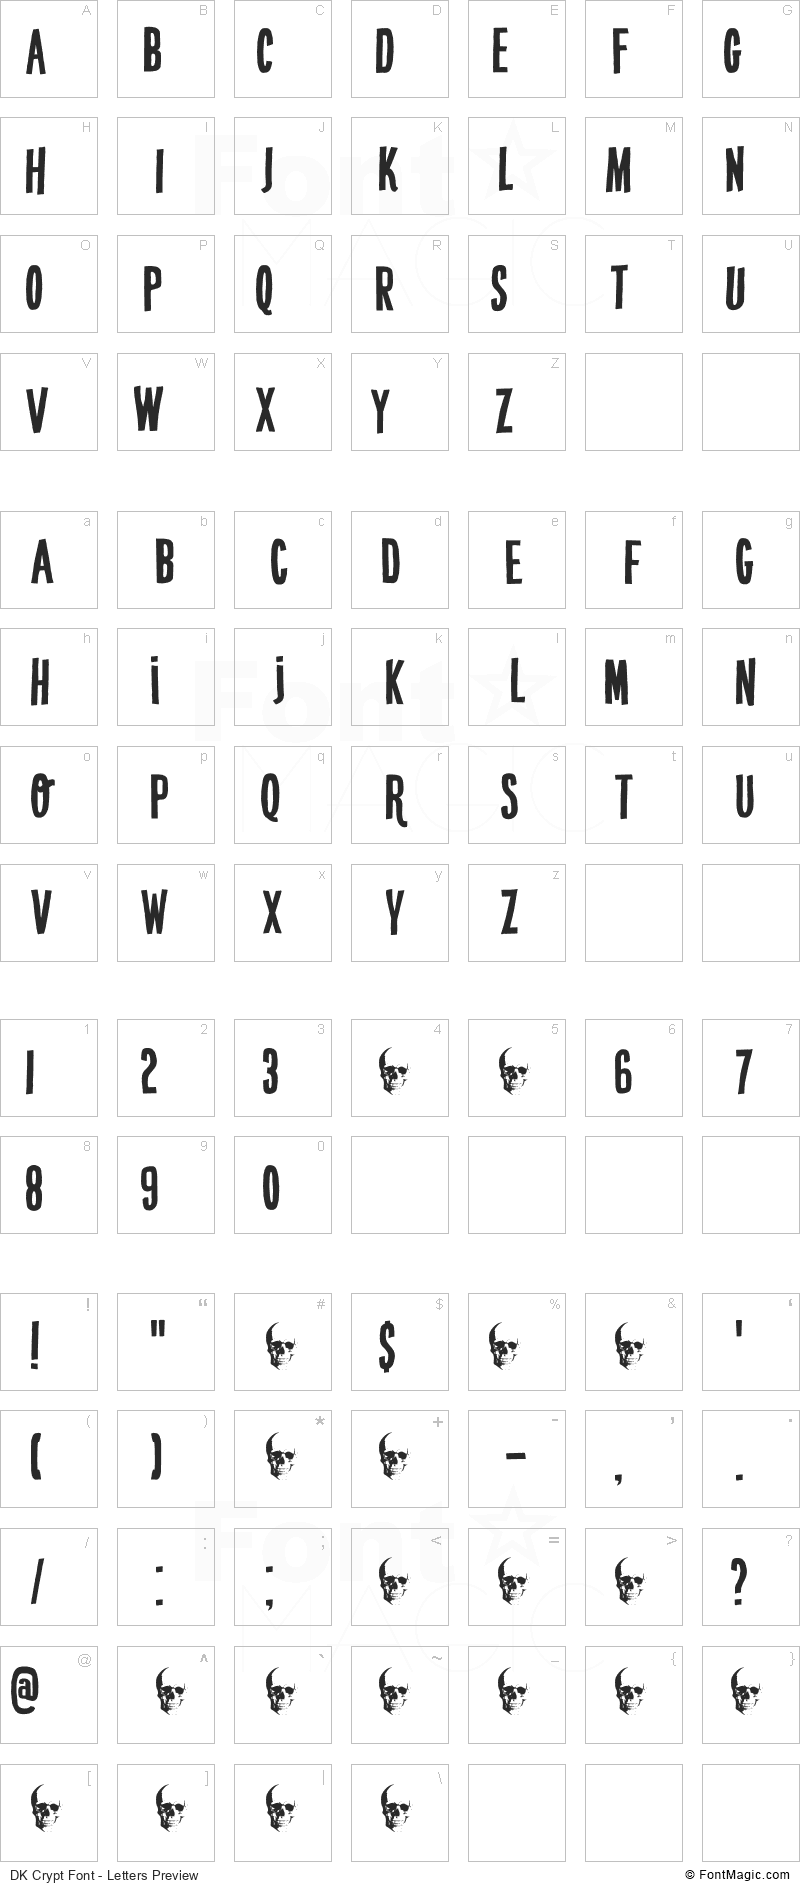 DK Crypt Font - All Latters Preview Chart